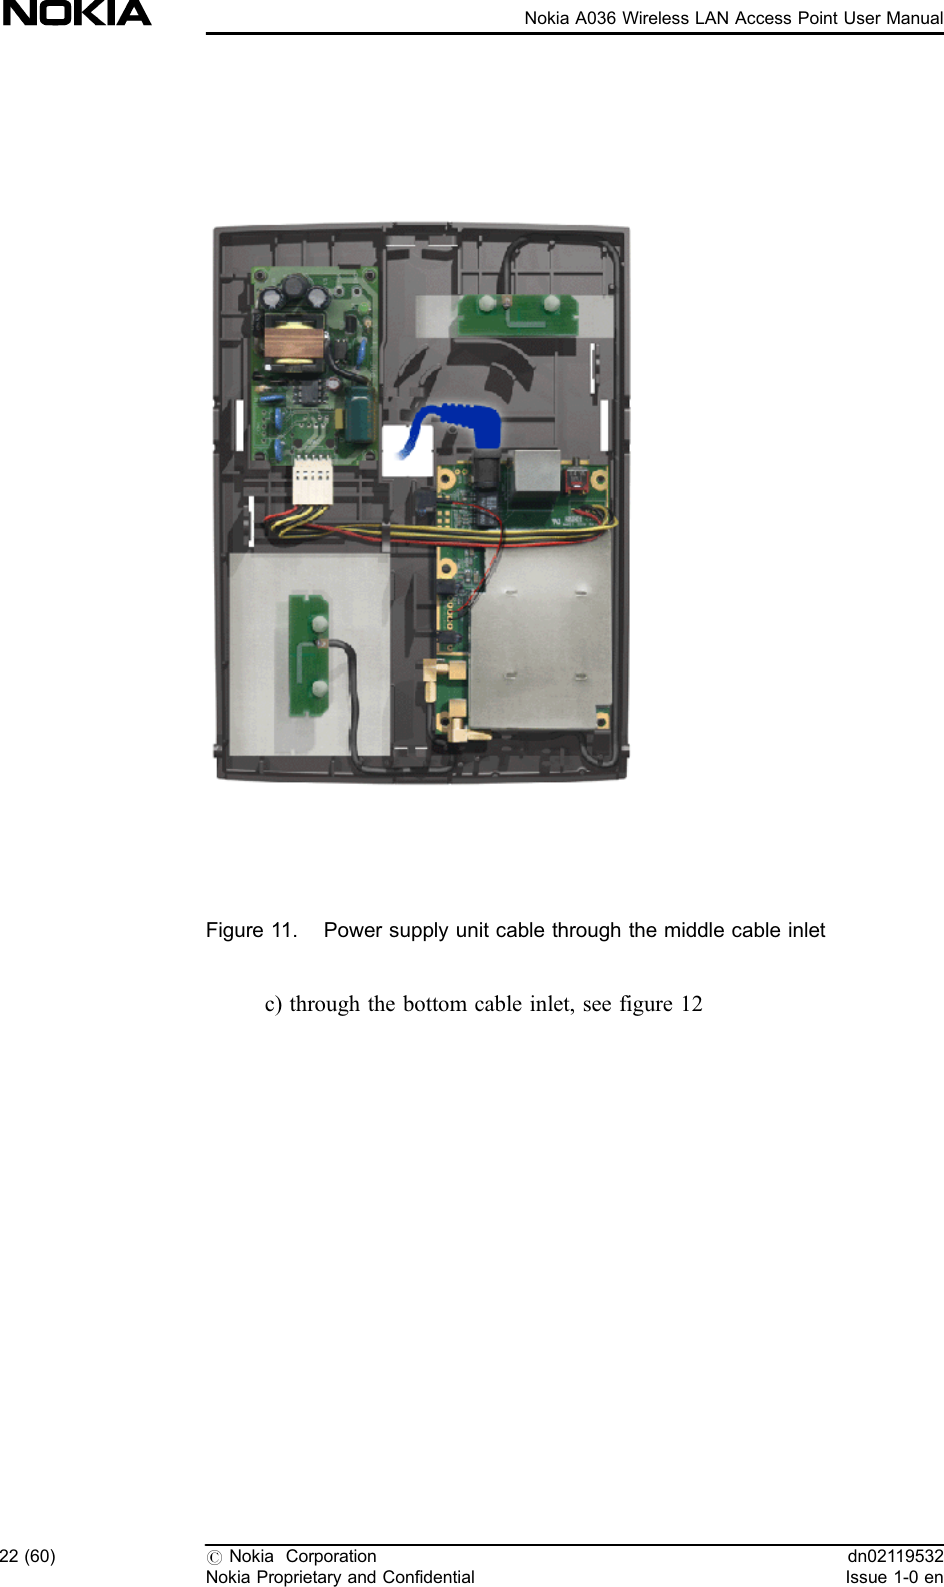 Figure 11. Power supply unit cable through the middle cable inletc) through the bottom cable inlet, see figure 1222 (60) #Nokia CorporationNokia Proprietary and Confidentialdn02119532Issue 1-0 enNokia A036 Wireless LAN Access Point User Manual